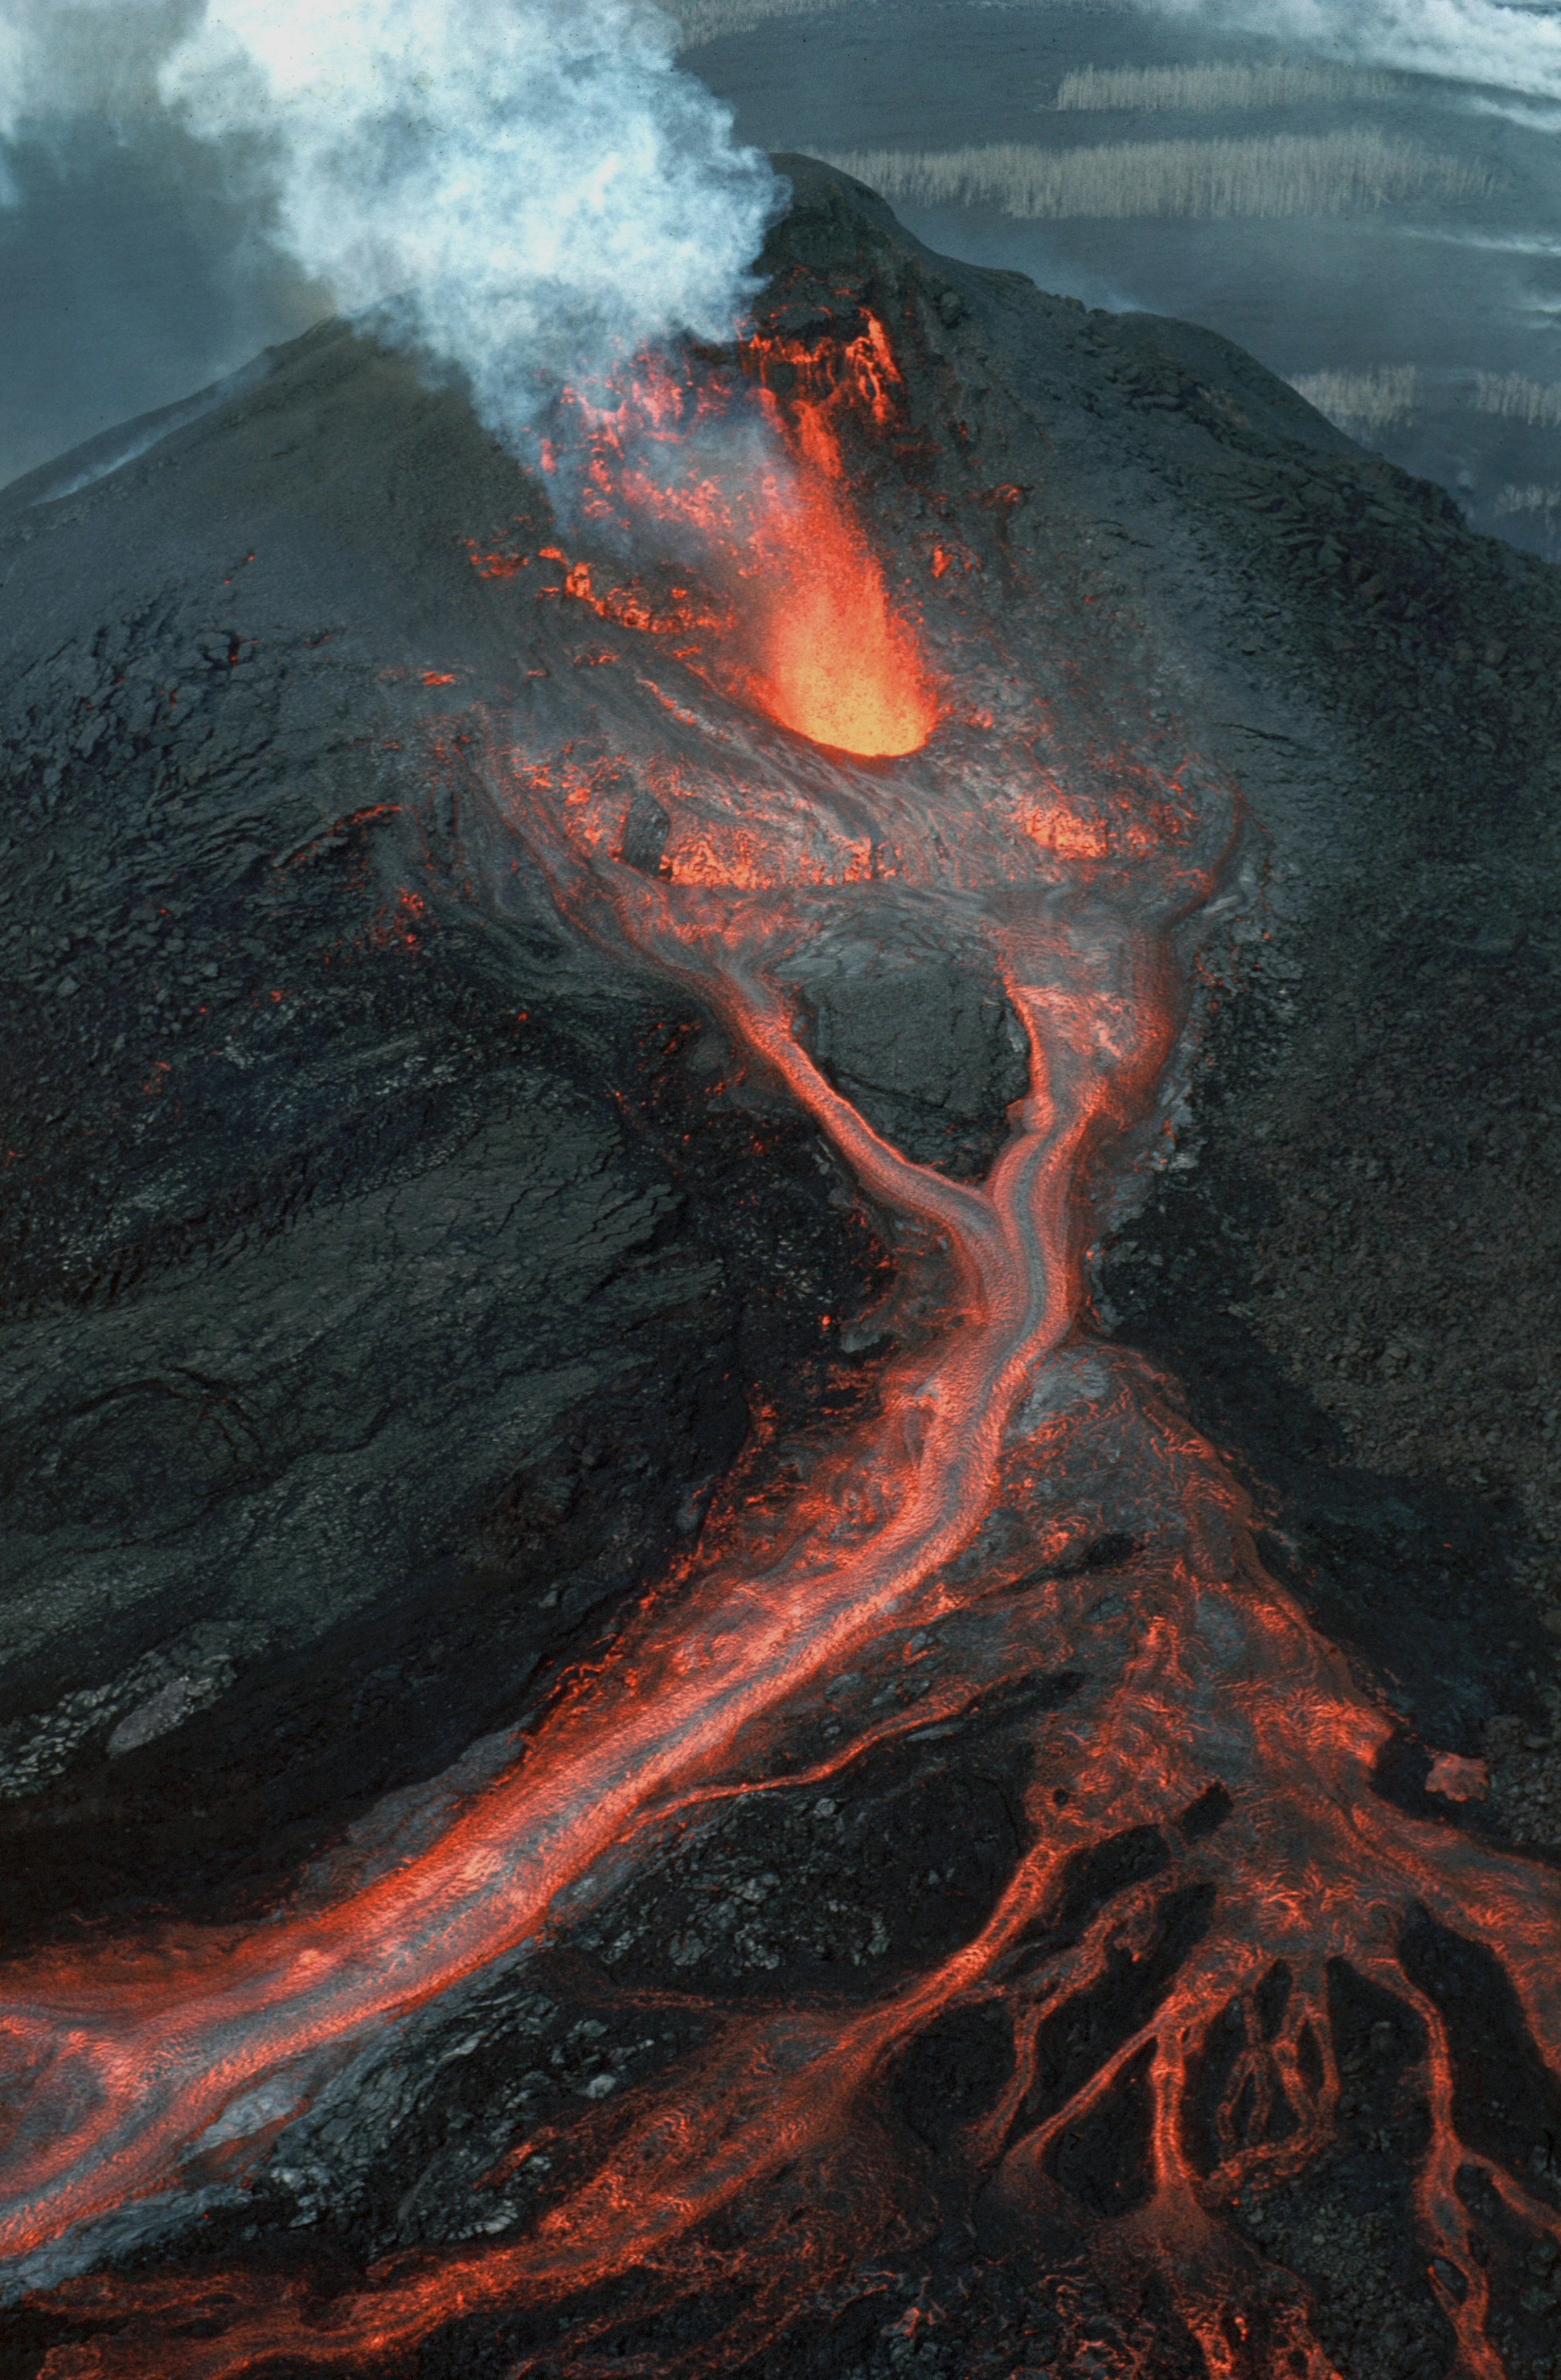 The Coolest Volcanos